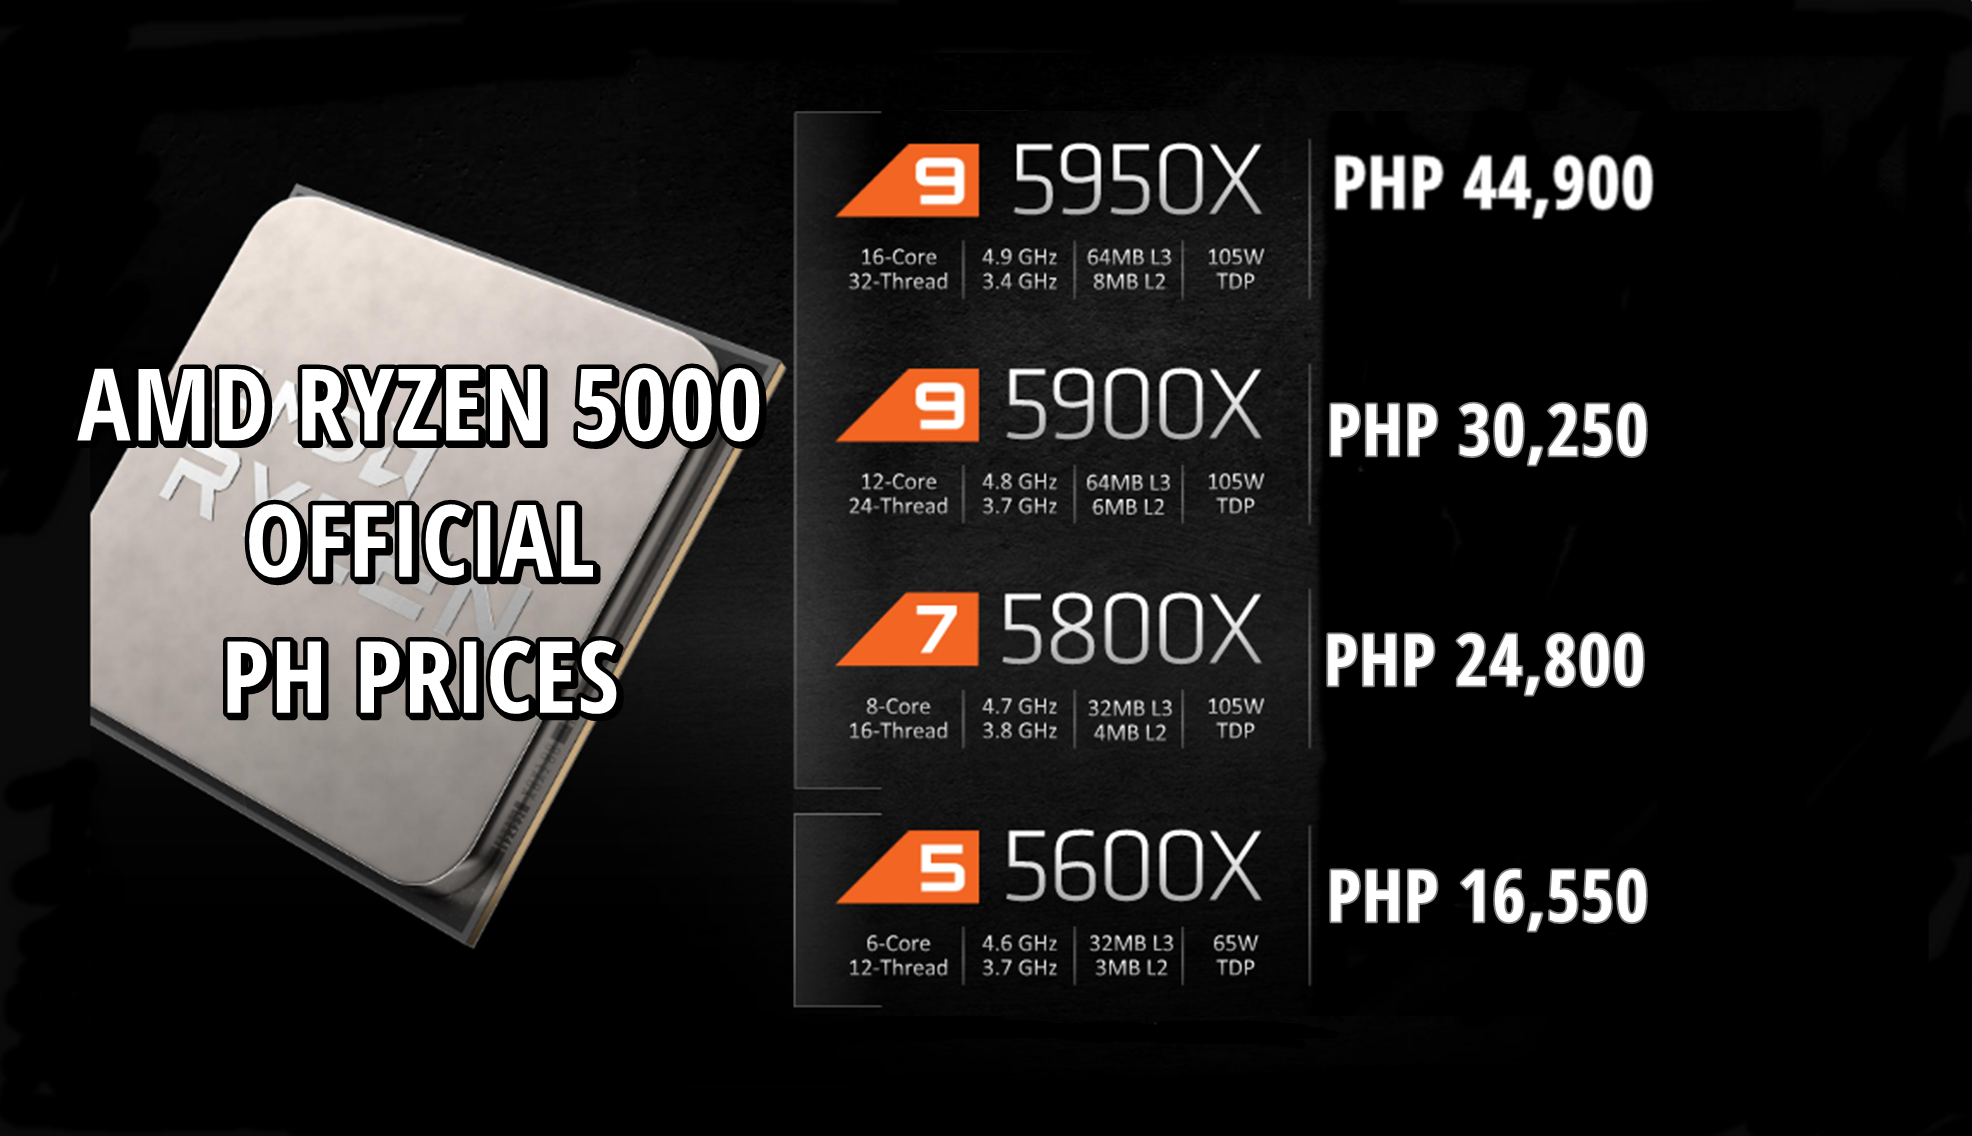 AMD Outs Ryzen 5000 Official PH Prices; More Expensive Than Intel Counterparts